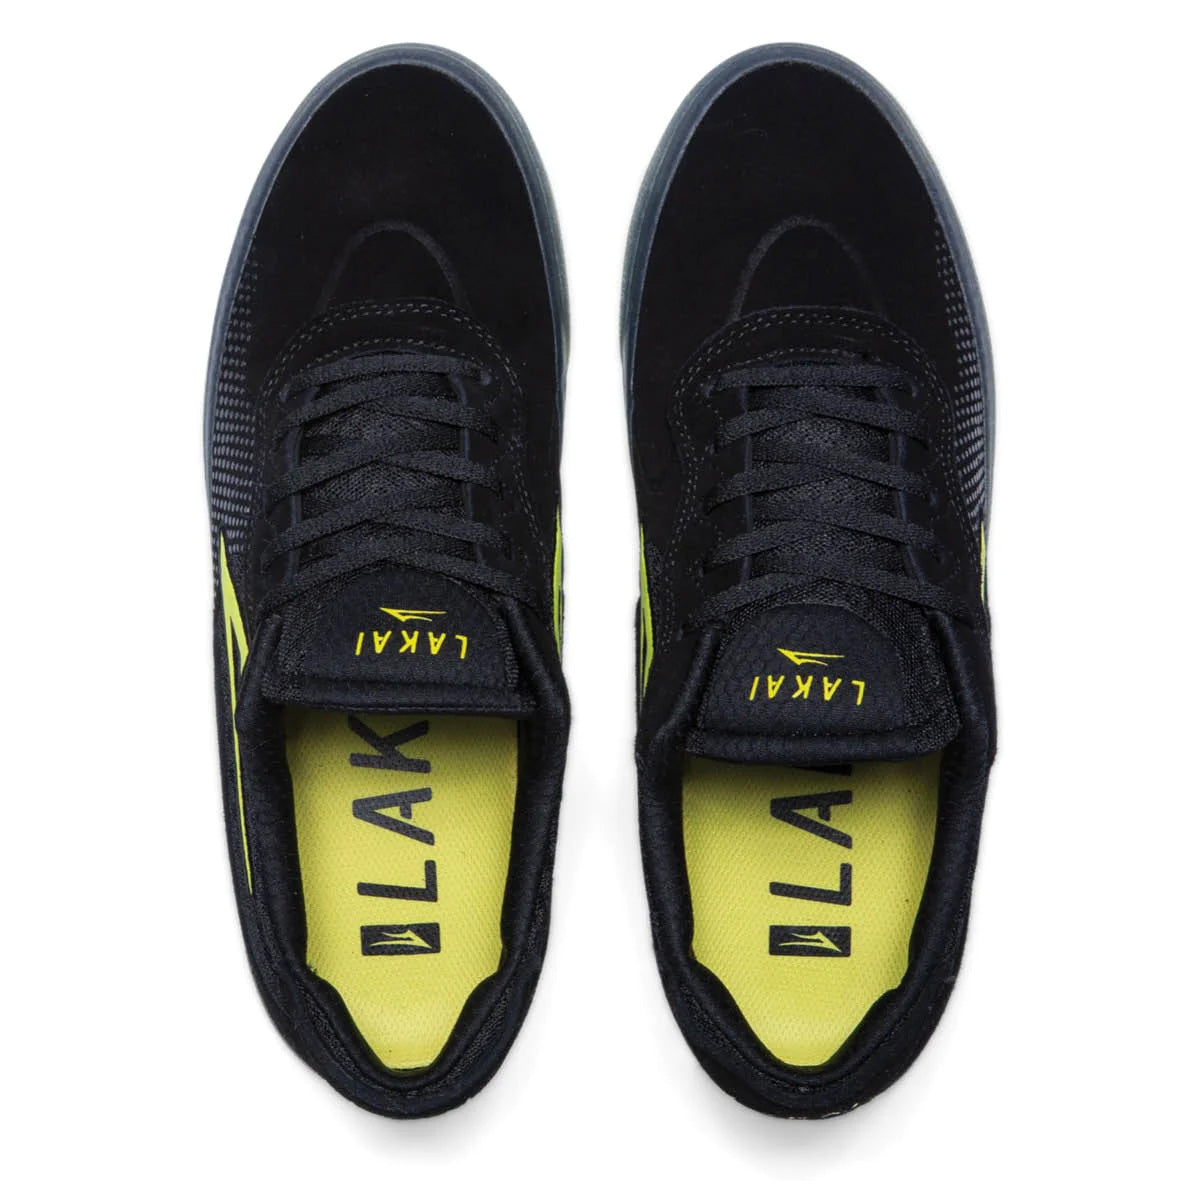 Black and neon green suede skateboarding shoes from Lakai. Pay by Klarna or Clearpay.